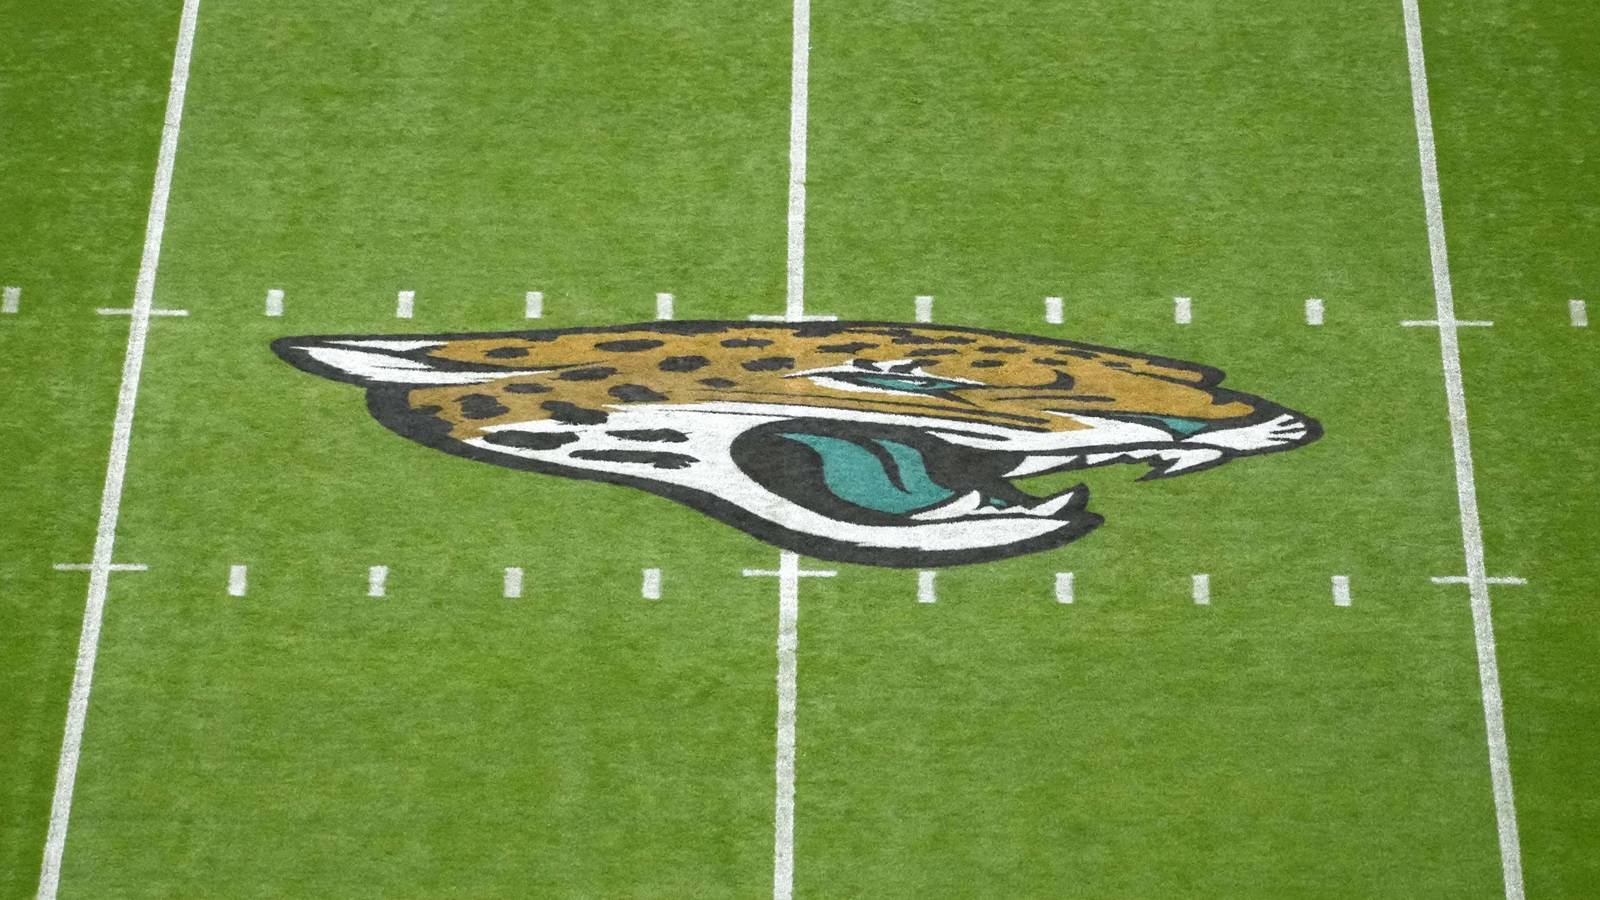 Former Jaguars Employee Amit Patel pleads guilty to $22 million theft